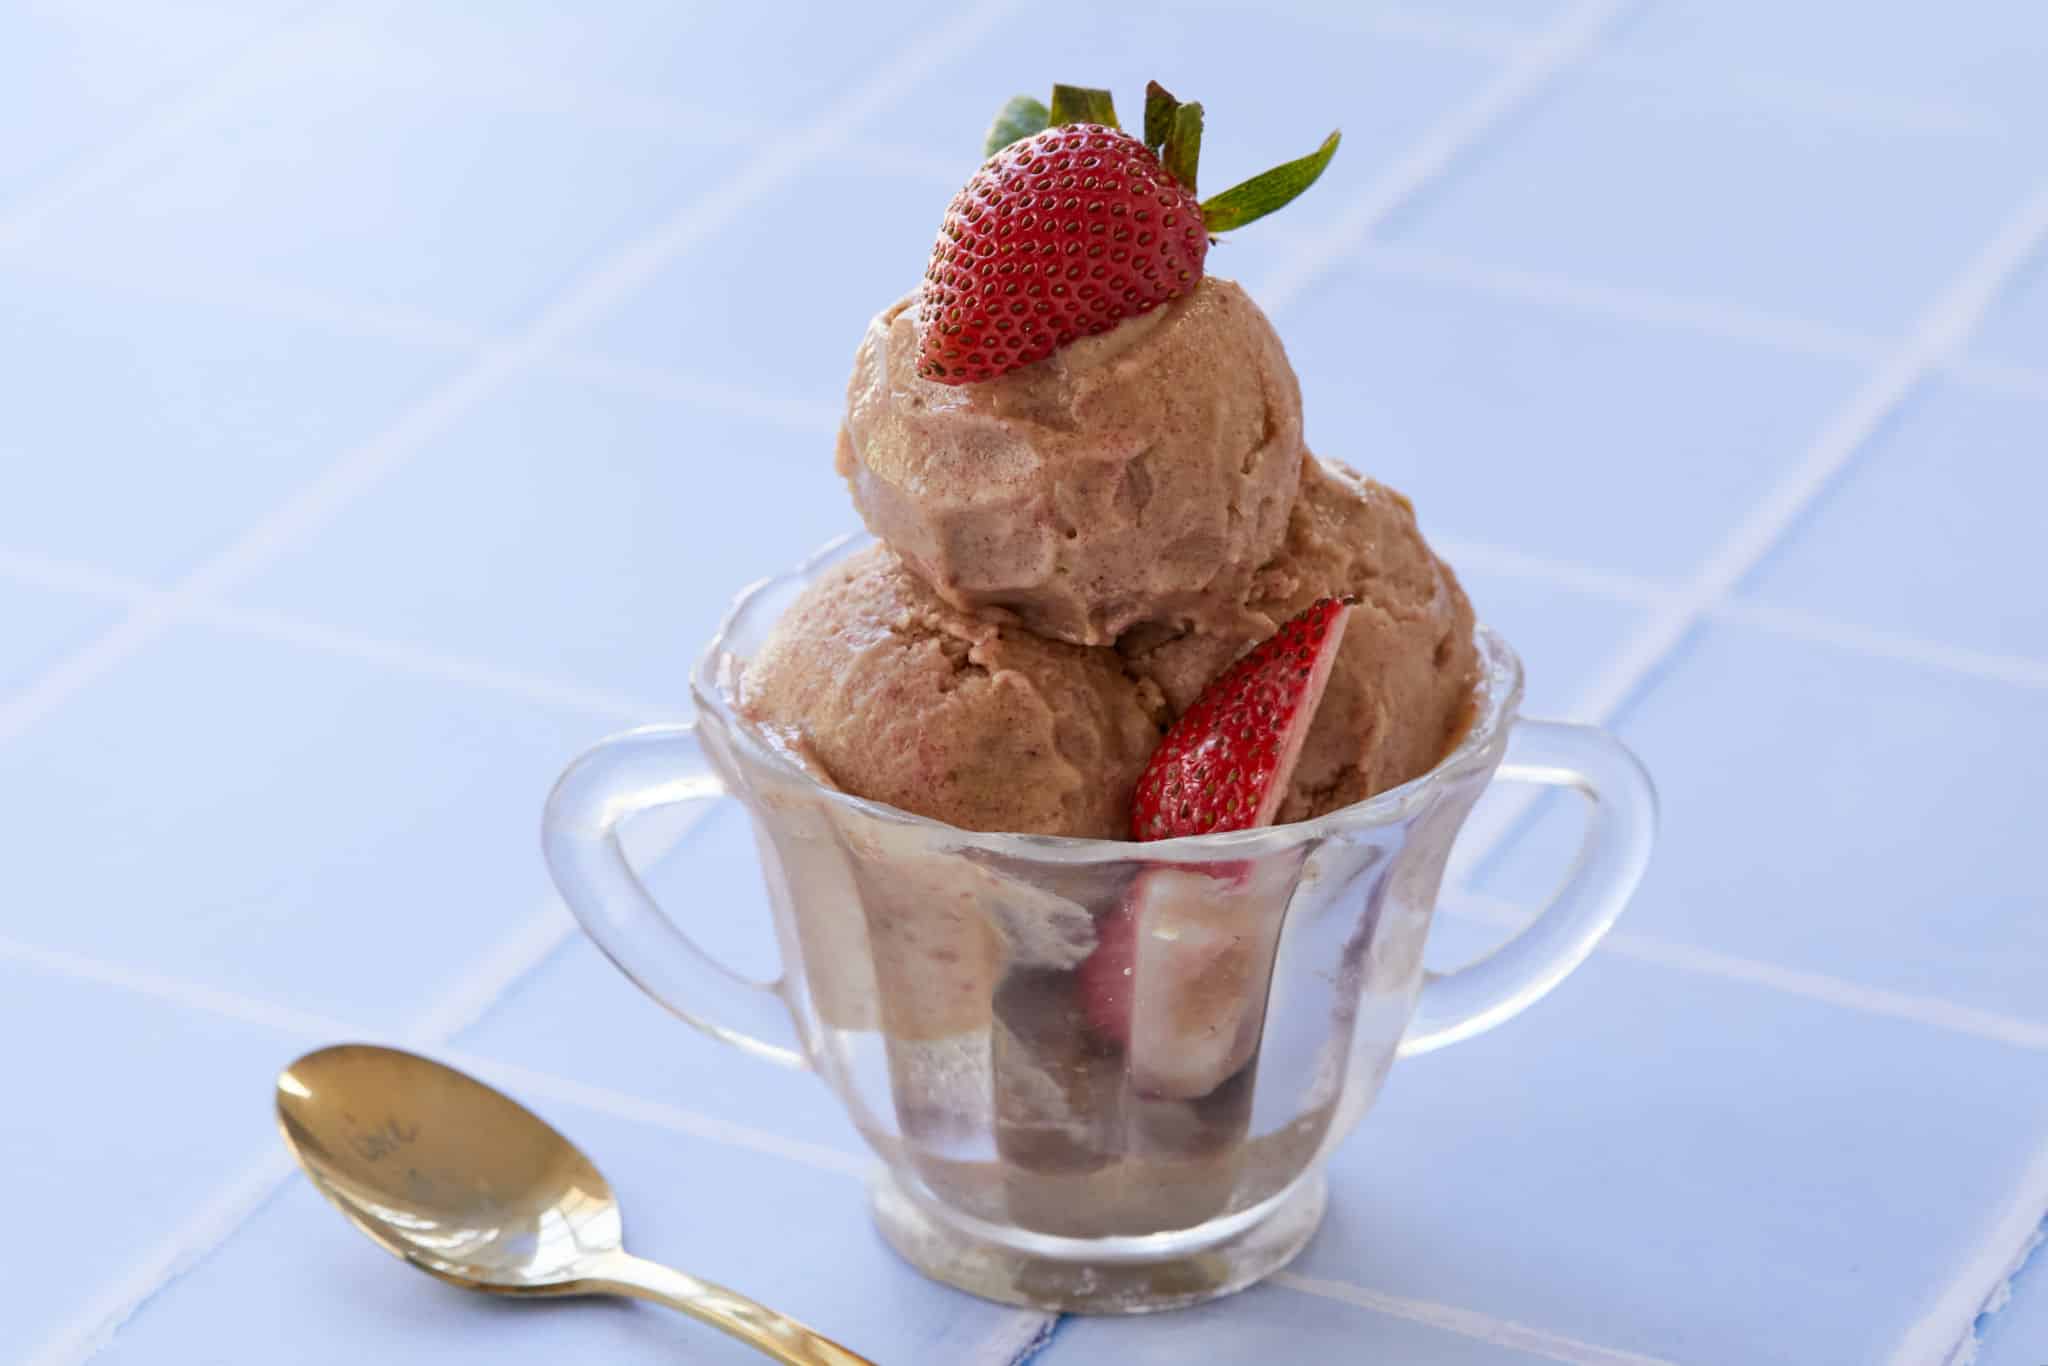 Ice cream for breakfast topped with strawberries